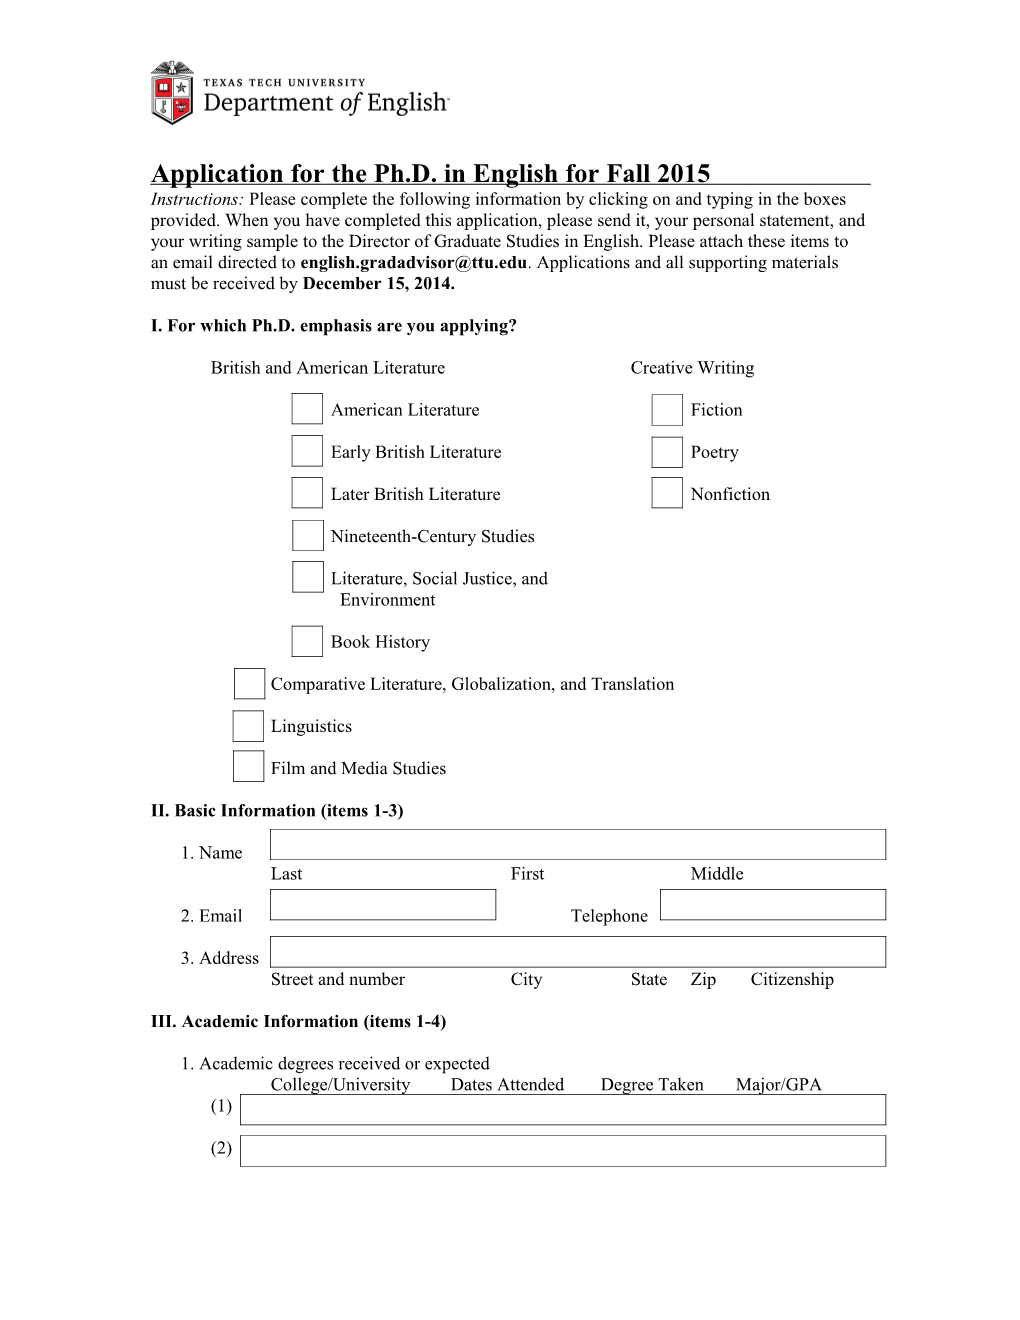 Application for the Ph